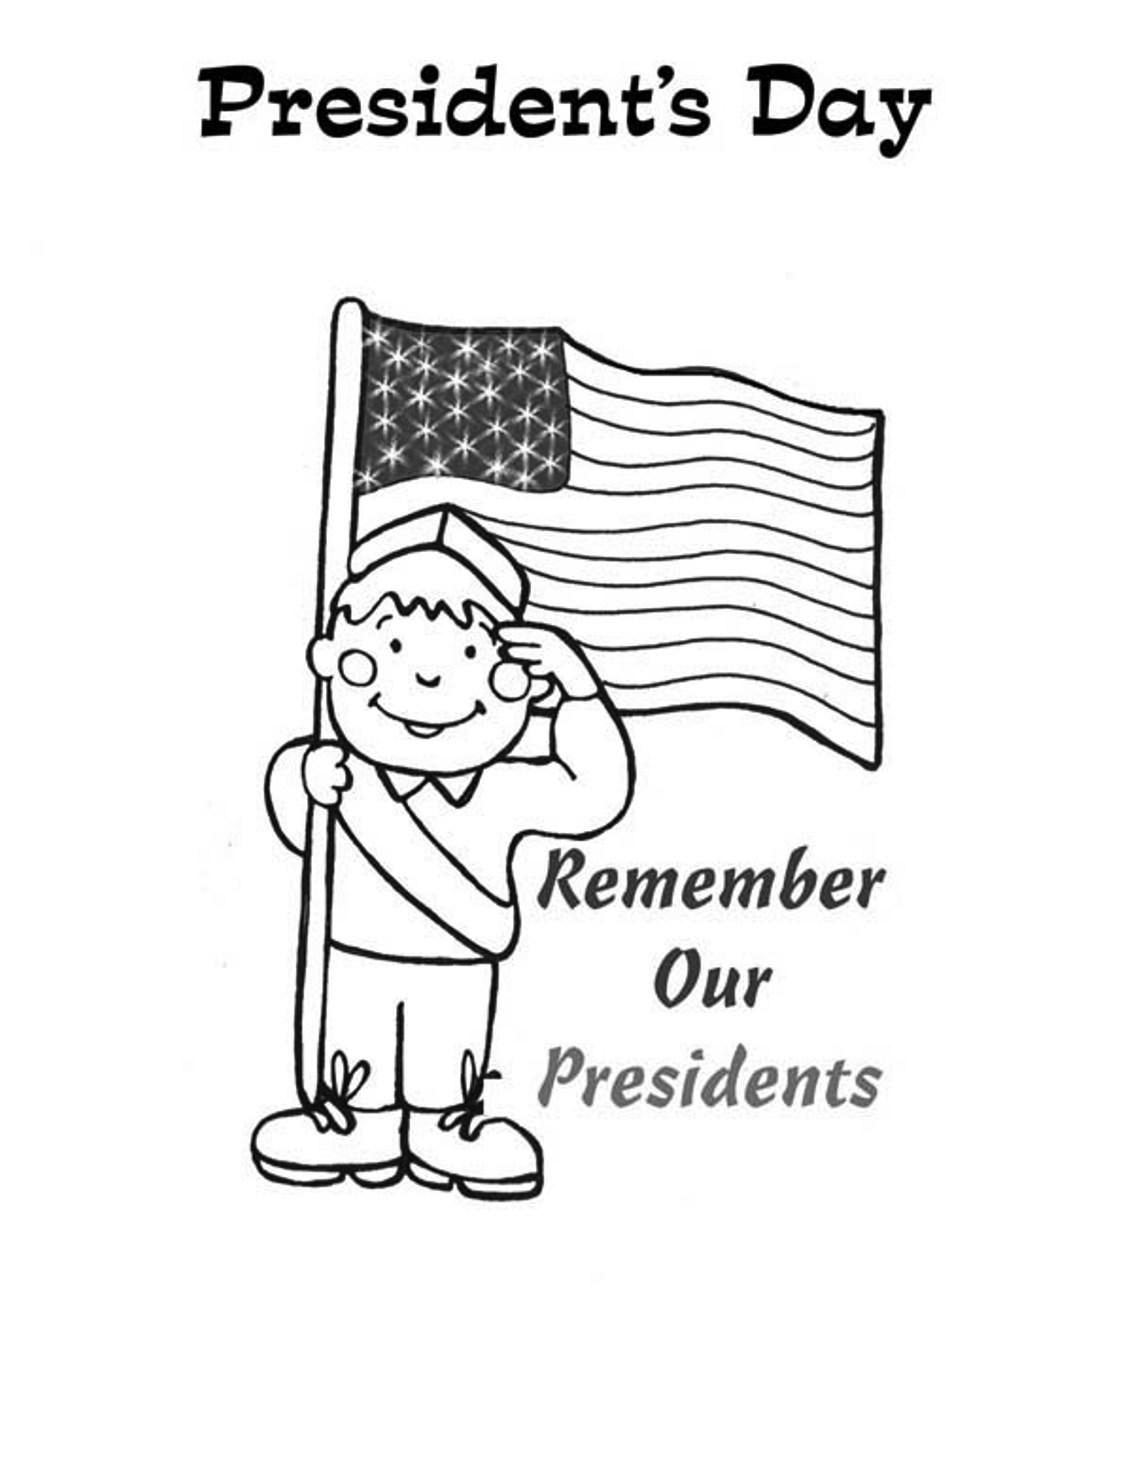 presidents-day-coloring-page